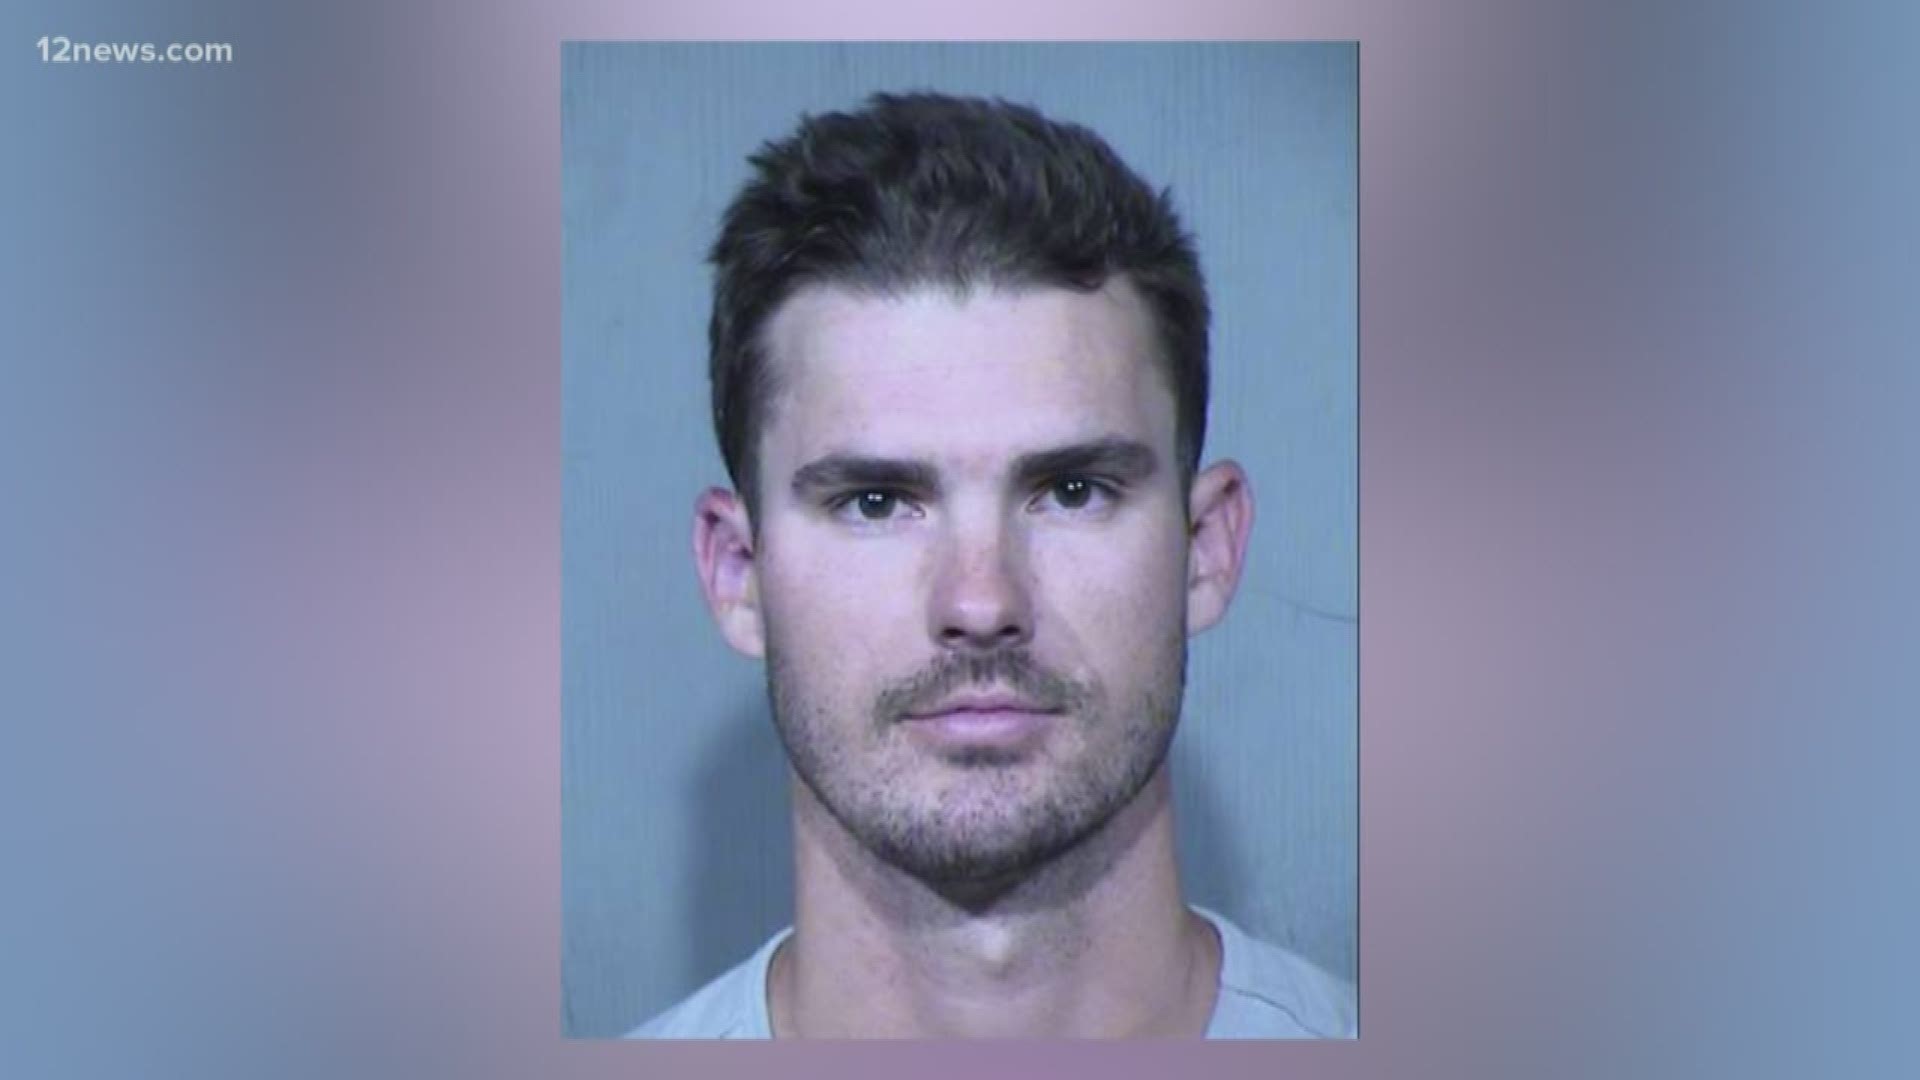 Jacob Nix and another man with the San Diego Padres were arrested for trying to break into a Peoria home. The homeowner kicked Nix in the face and then tased him.